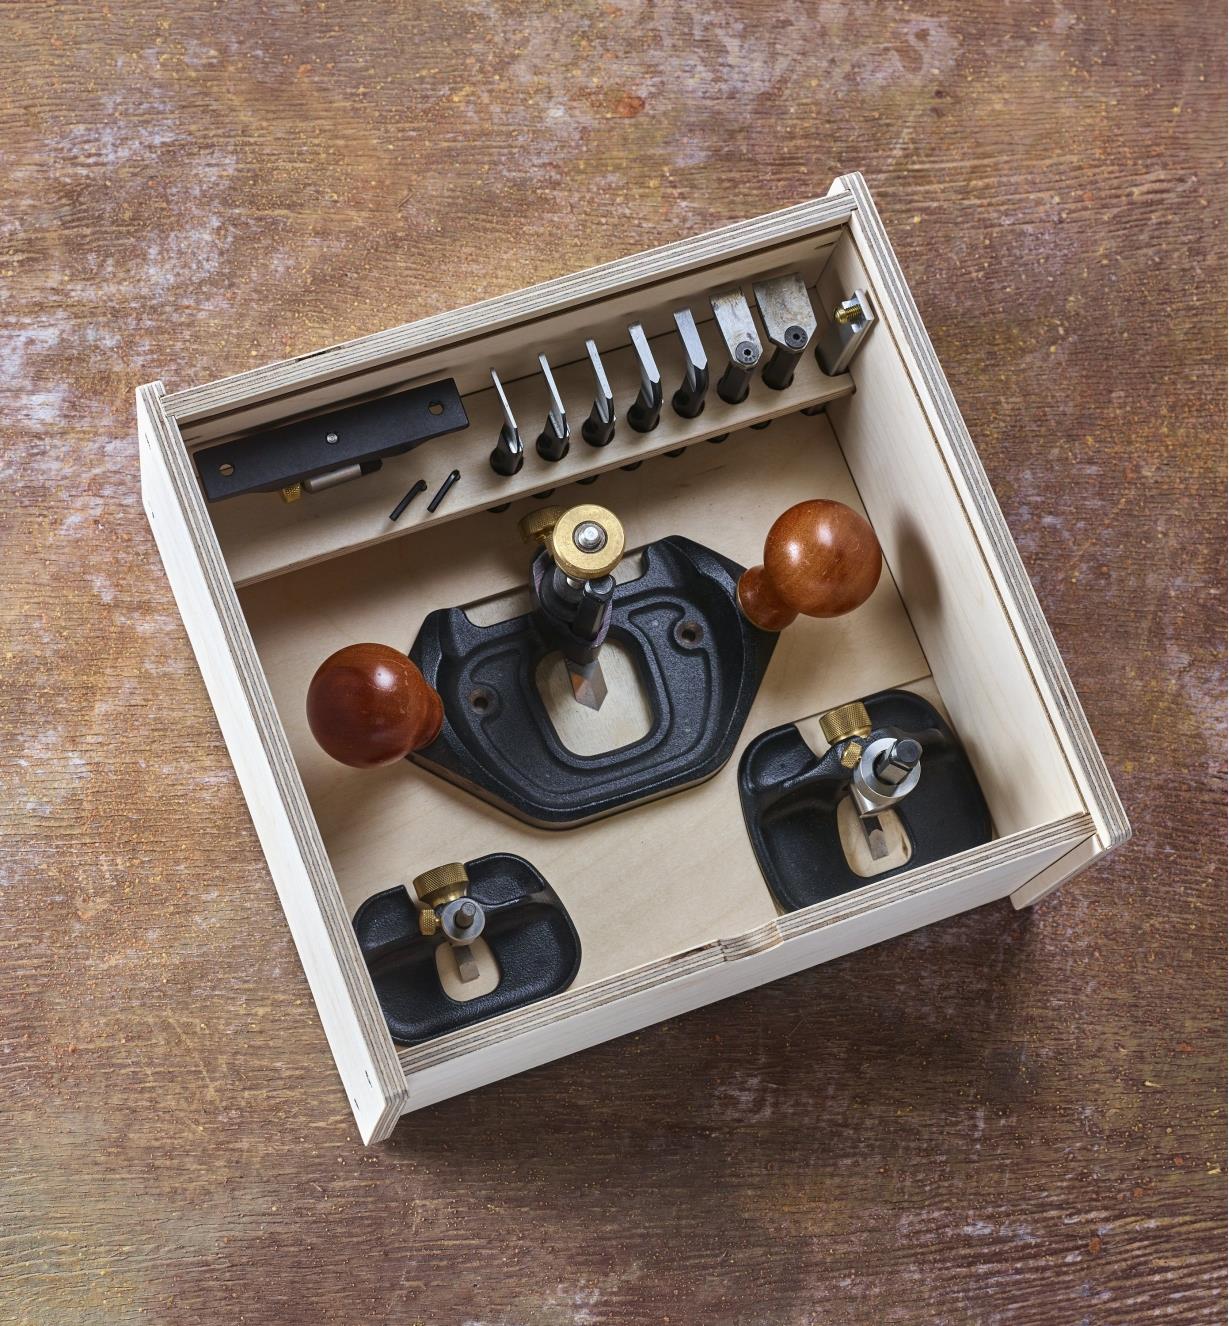 Veritas small, medium and large router planes and accessories stored in a Veritas router plane box